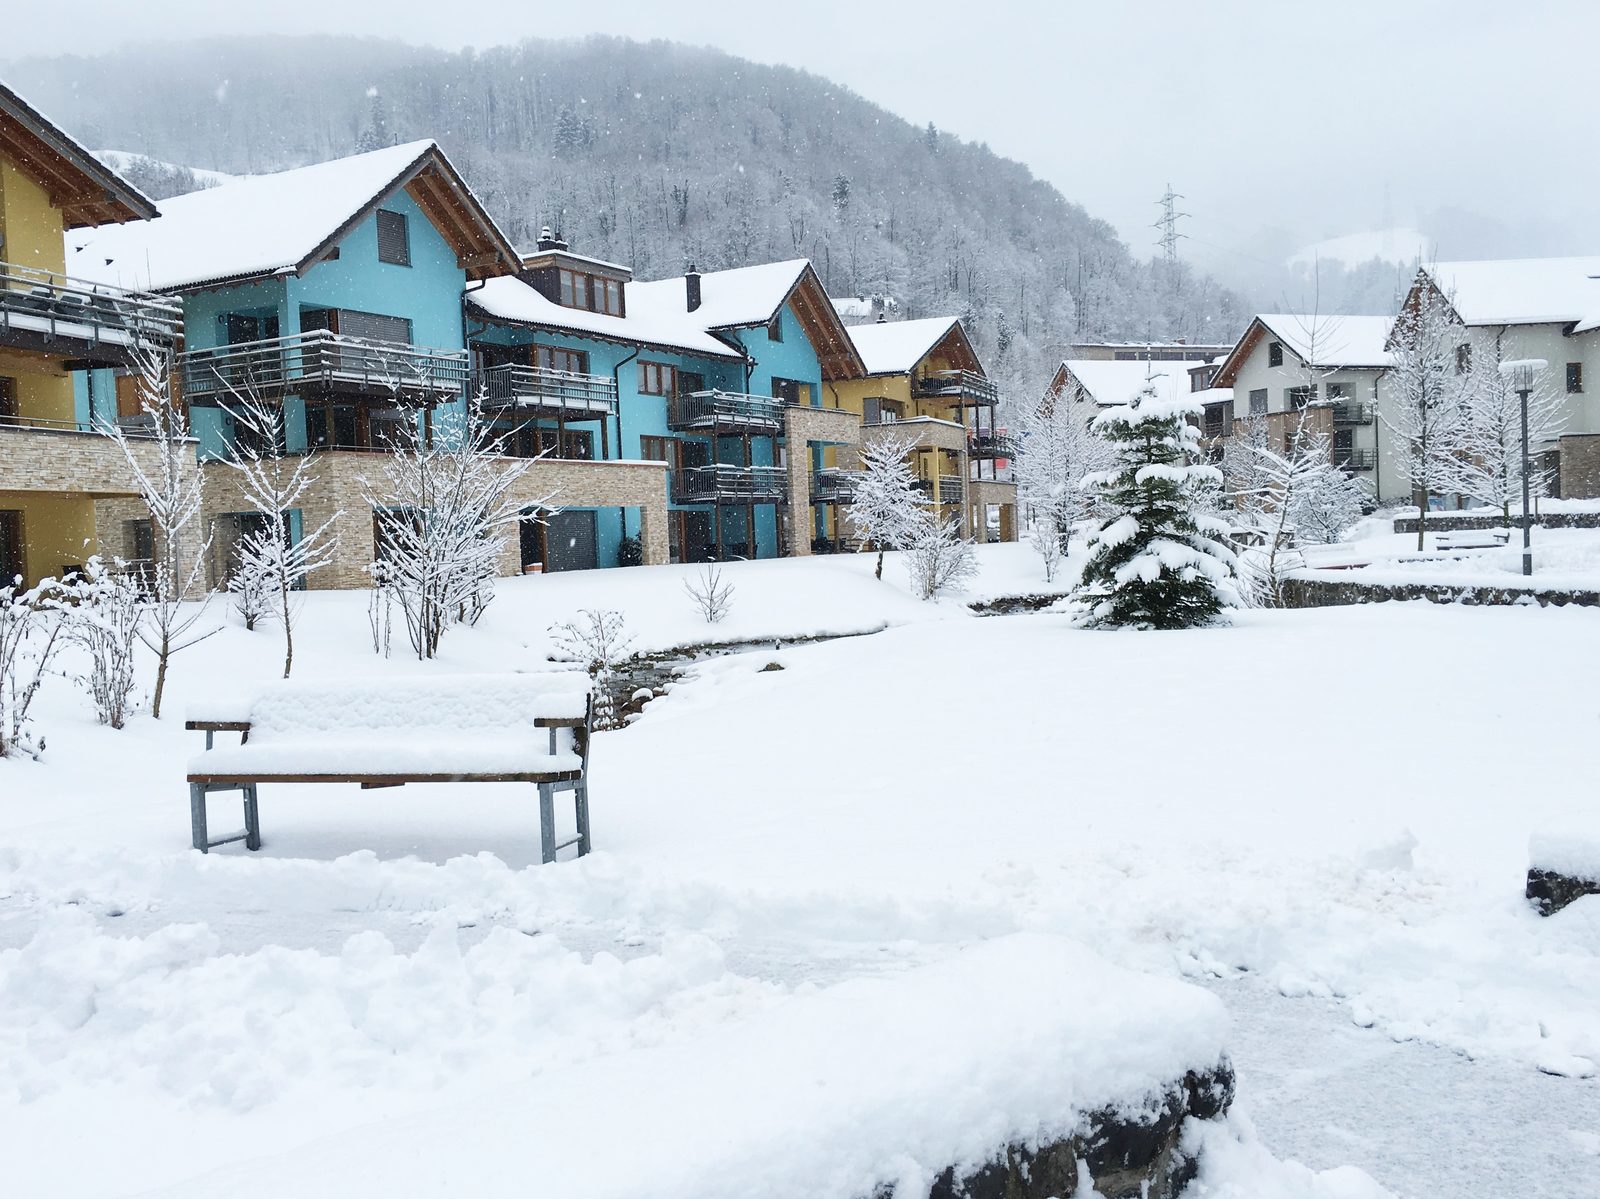 The village square of Resort Walensee in the region of Heidiland, Switzerland, during a winter sports holiday on the Flumserberg